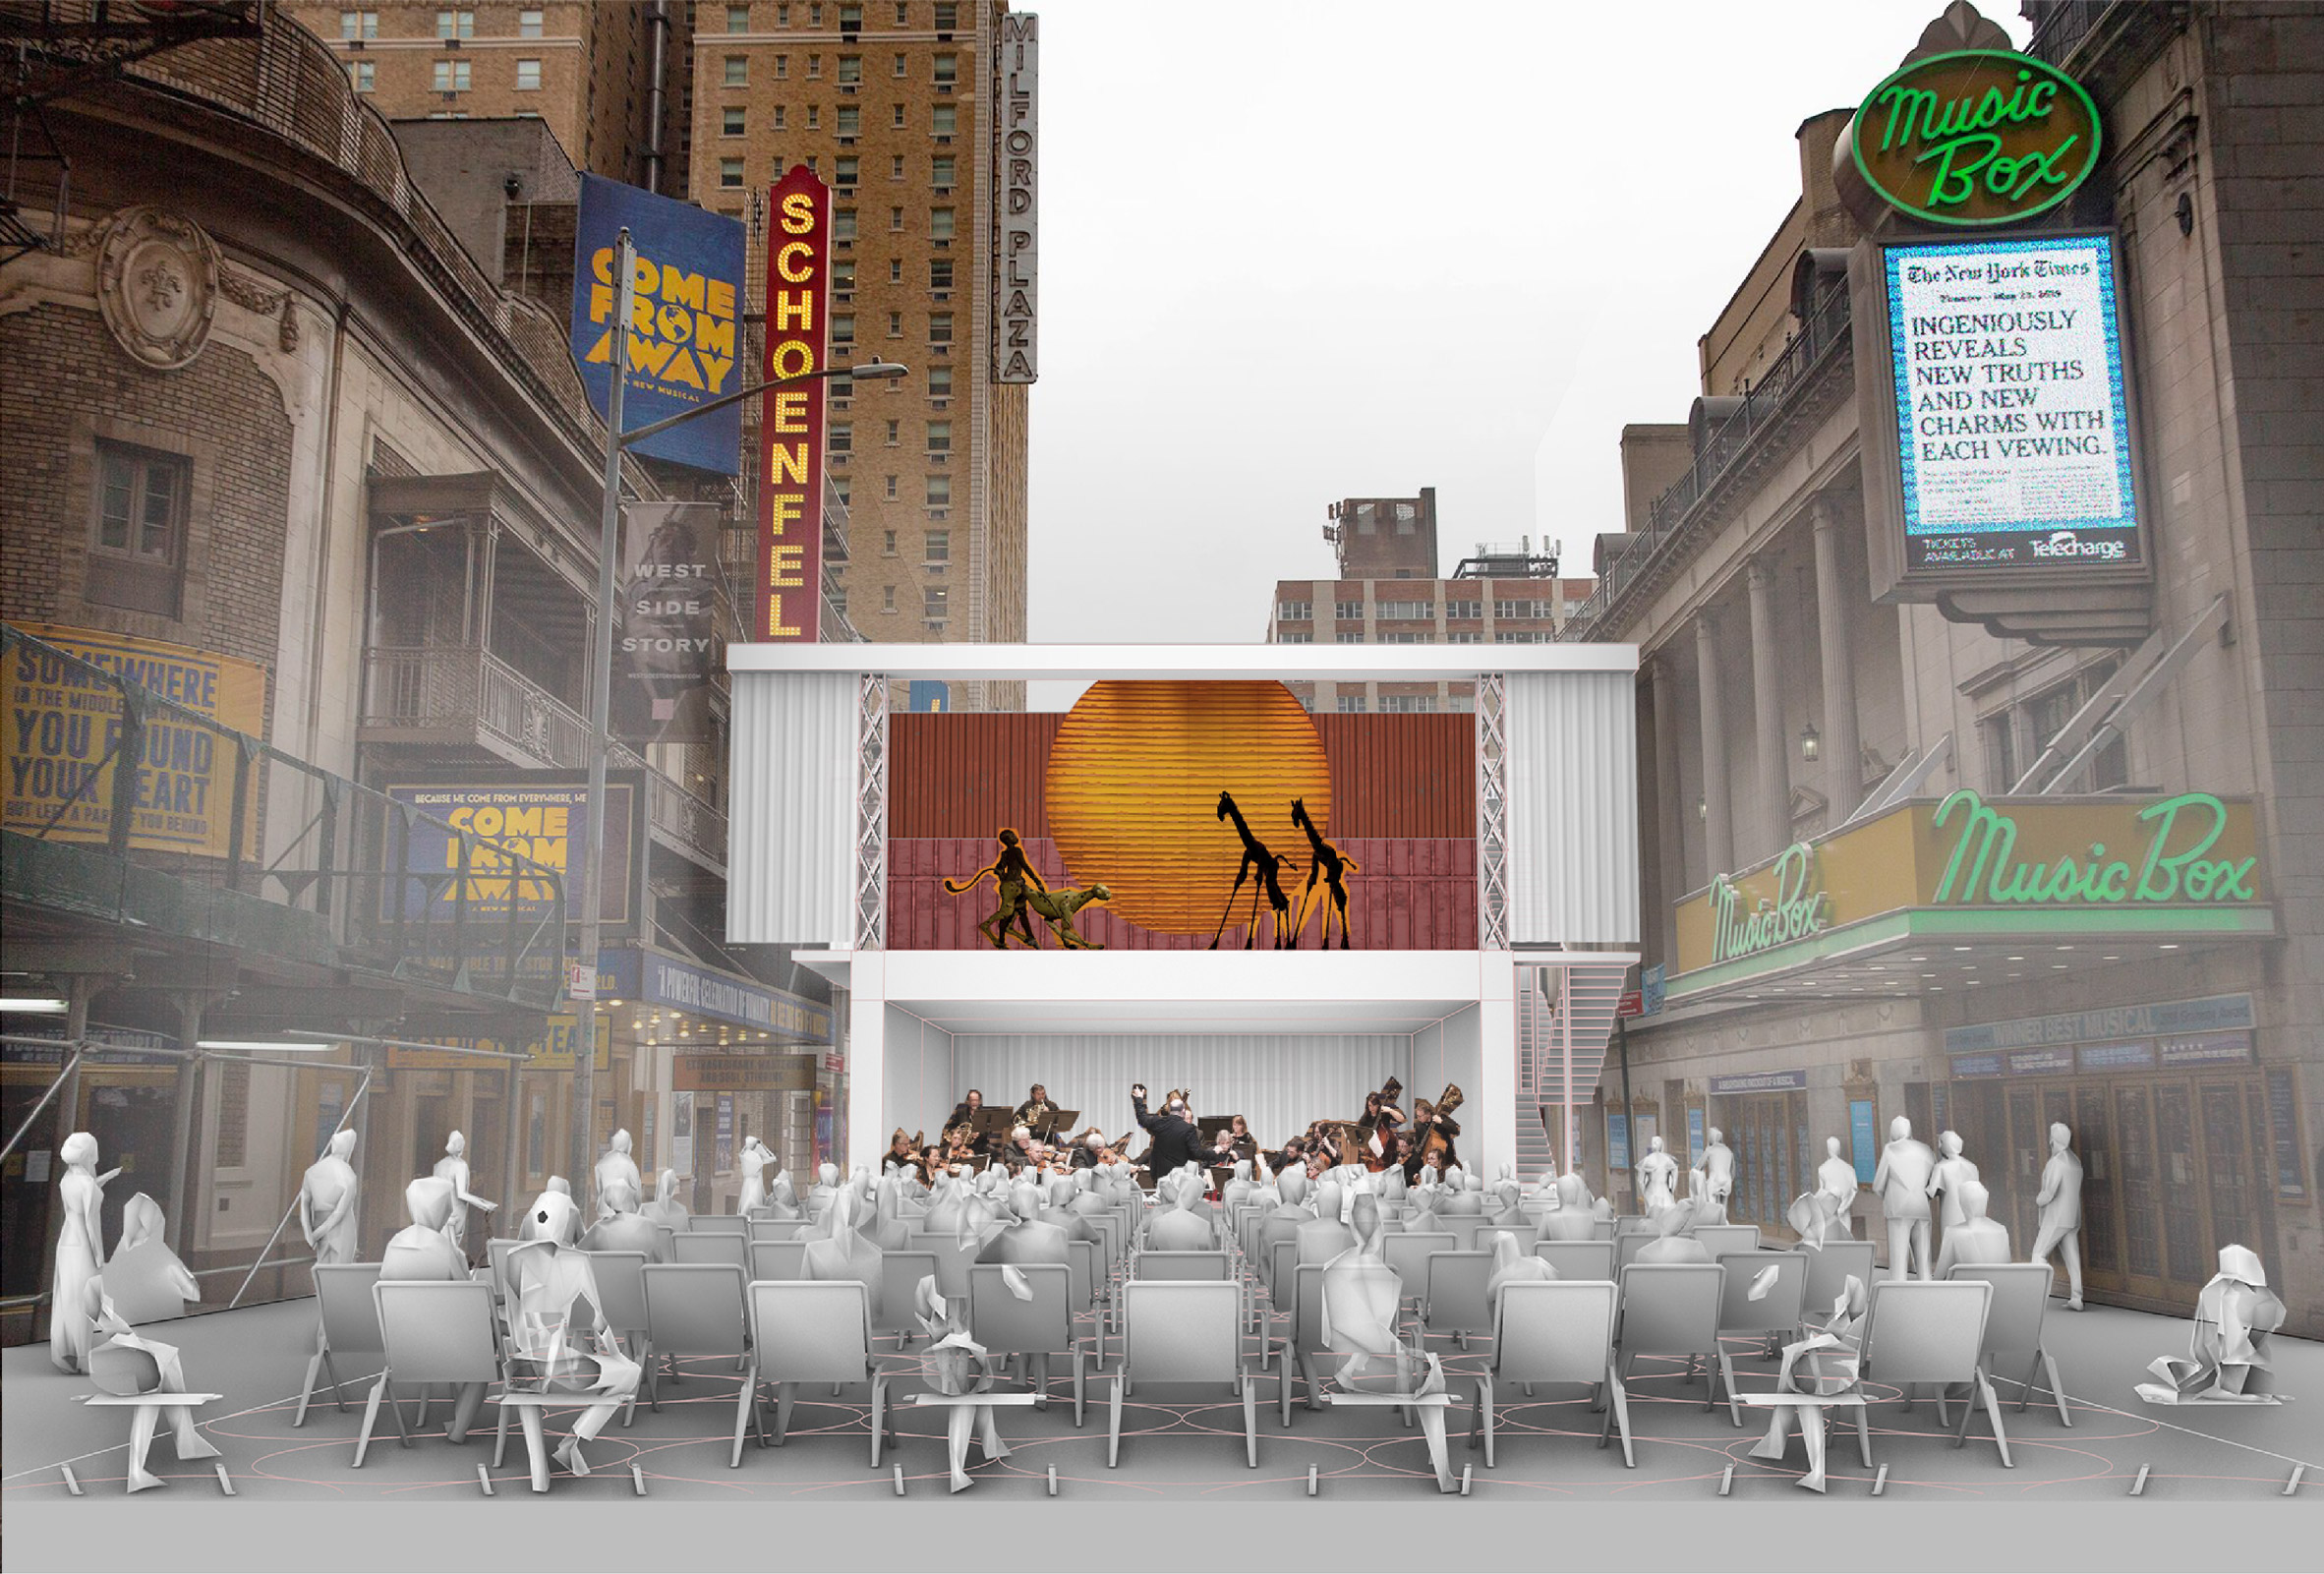 Shipping container theatre concept by Marvel